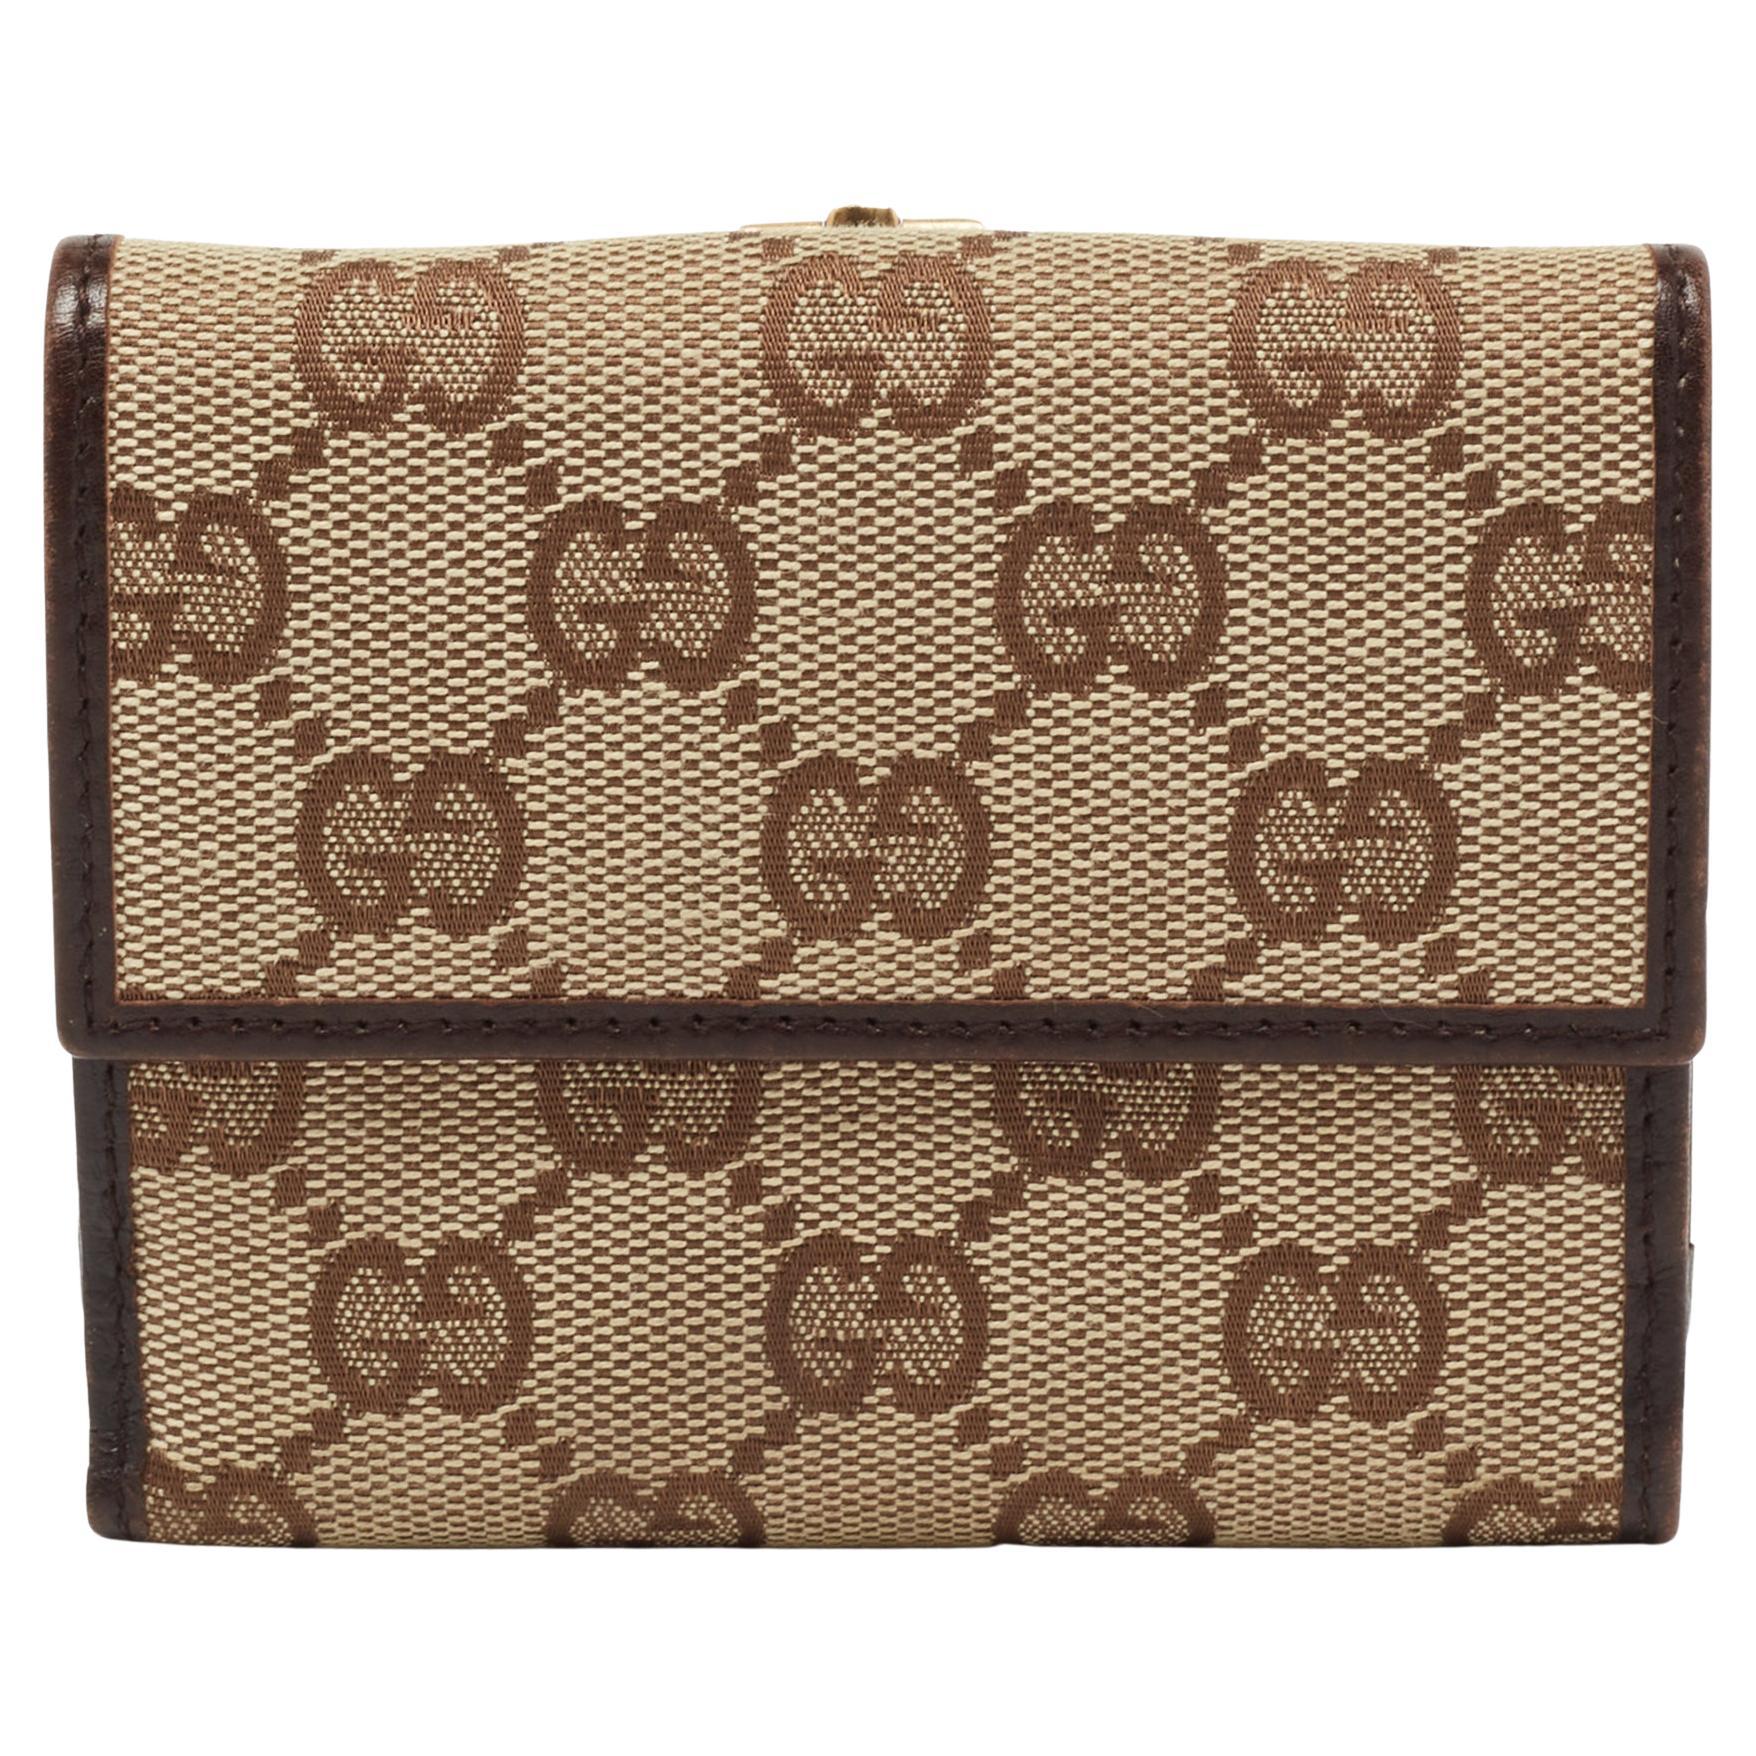 Gucci Beige/Brown GG Canvas and Leather Horsebit Clasp Compact Wallet